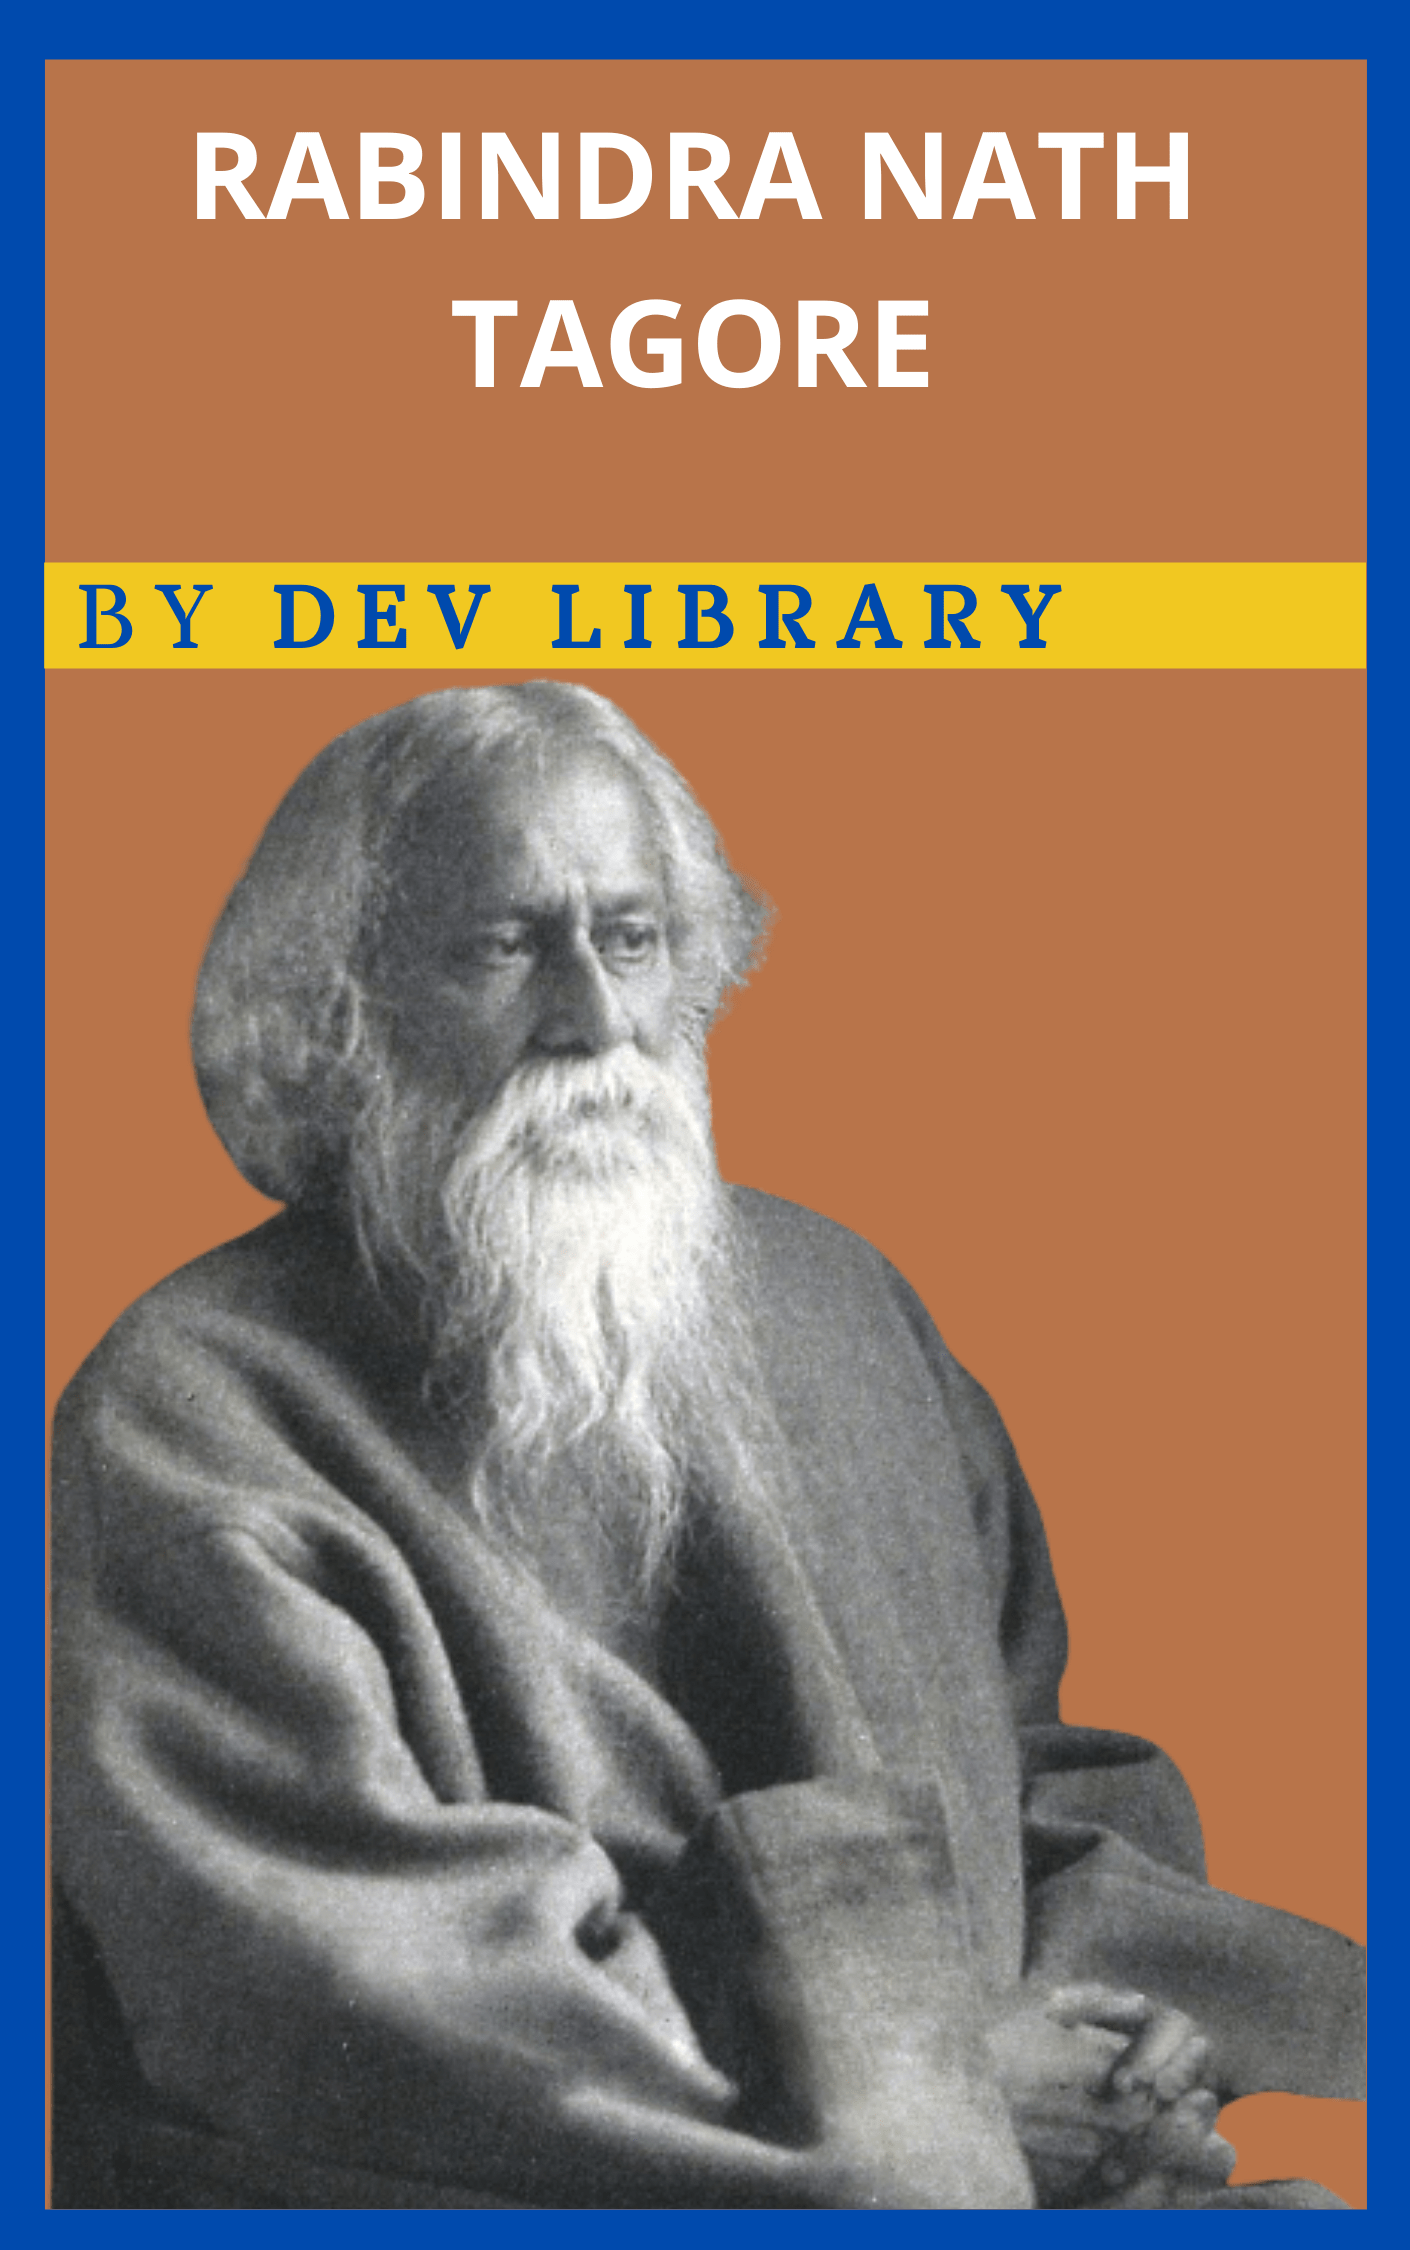 biography of rabindranath tagore in 150 words